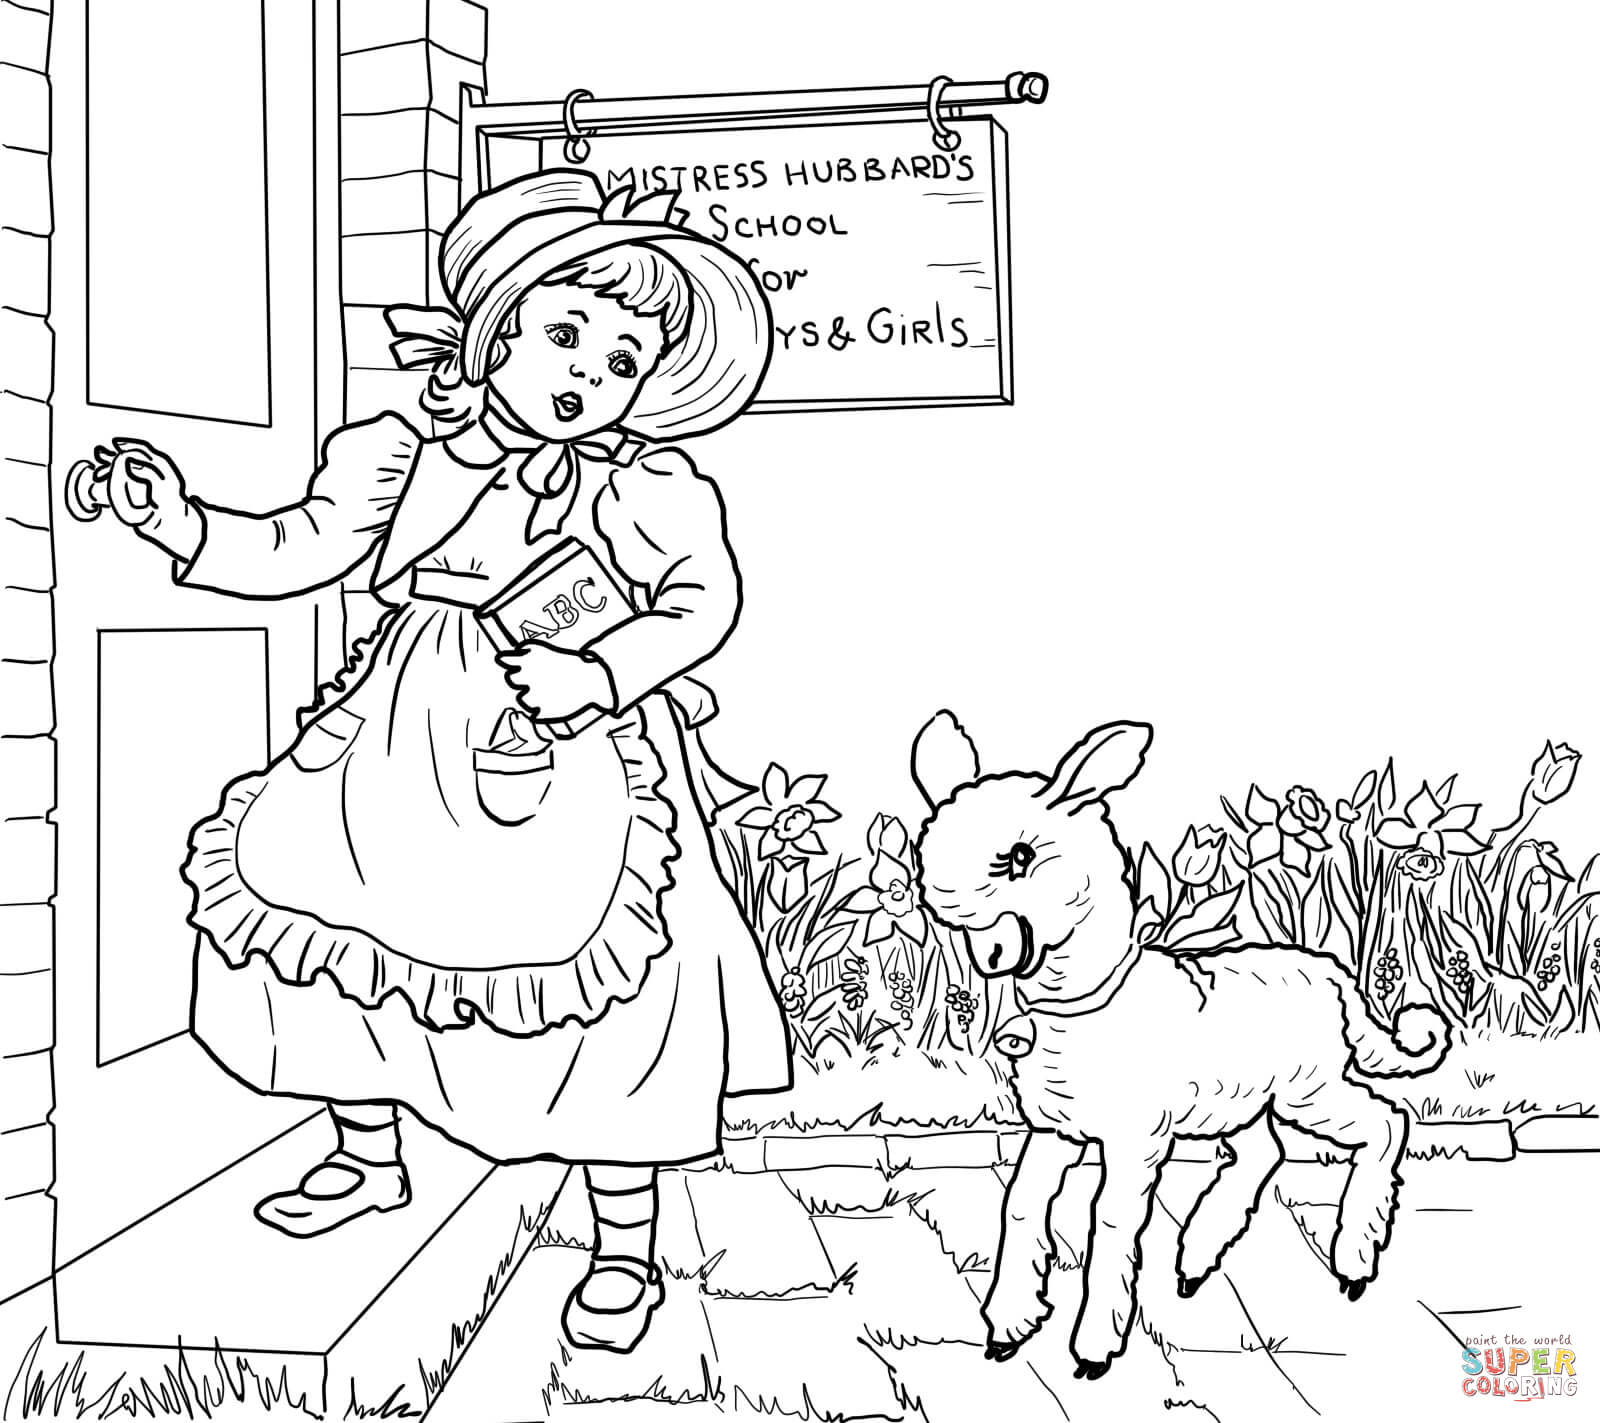 Mary Had a Little Lamb Nursery Rhyme coloring page | Free ...